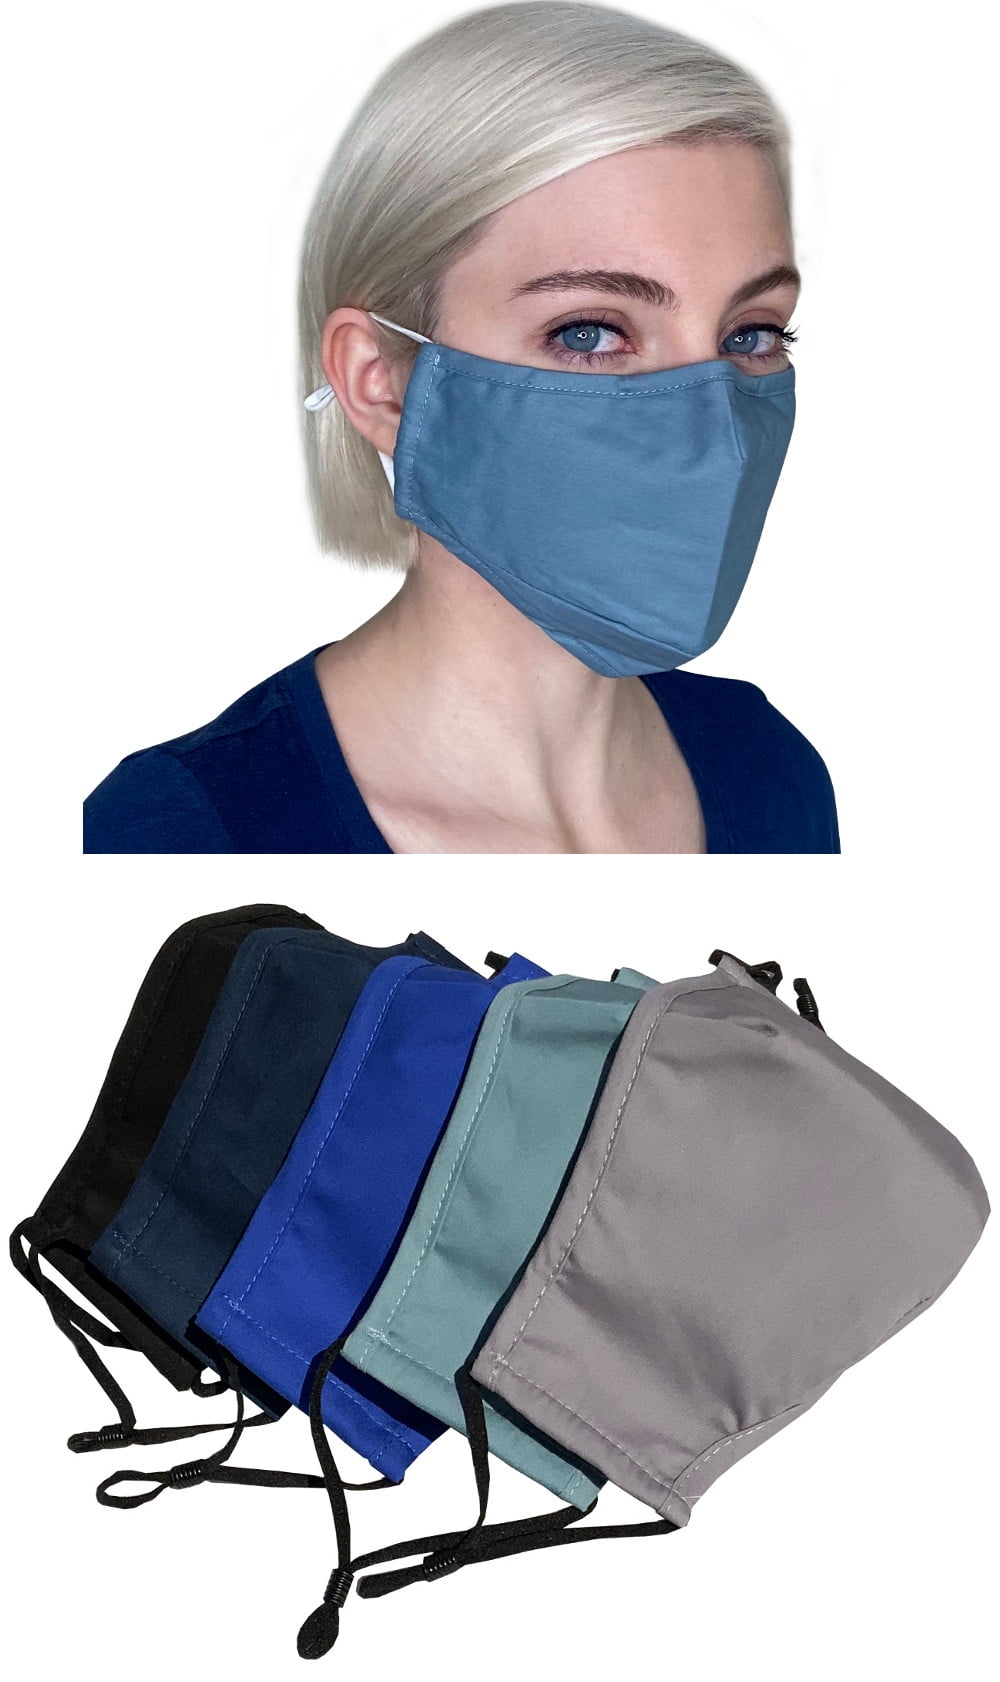 Filter Pocket 3 Pack Cotton Cloth Face Mask/Covering with Nose Wire Adjustable Ear Loops